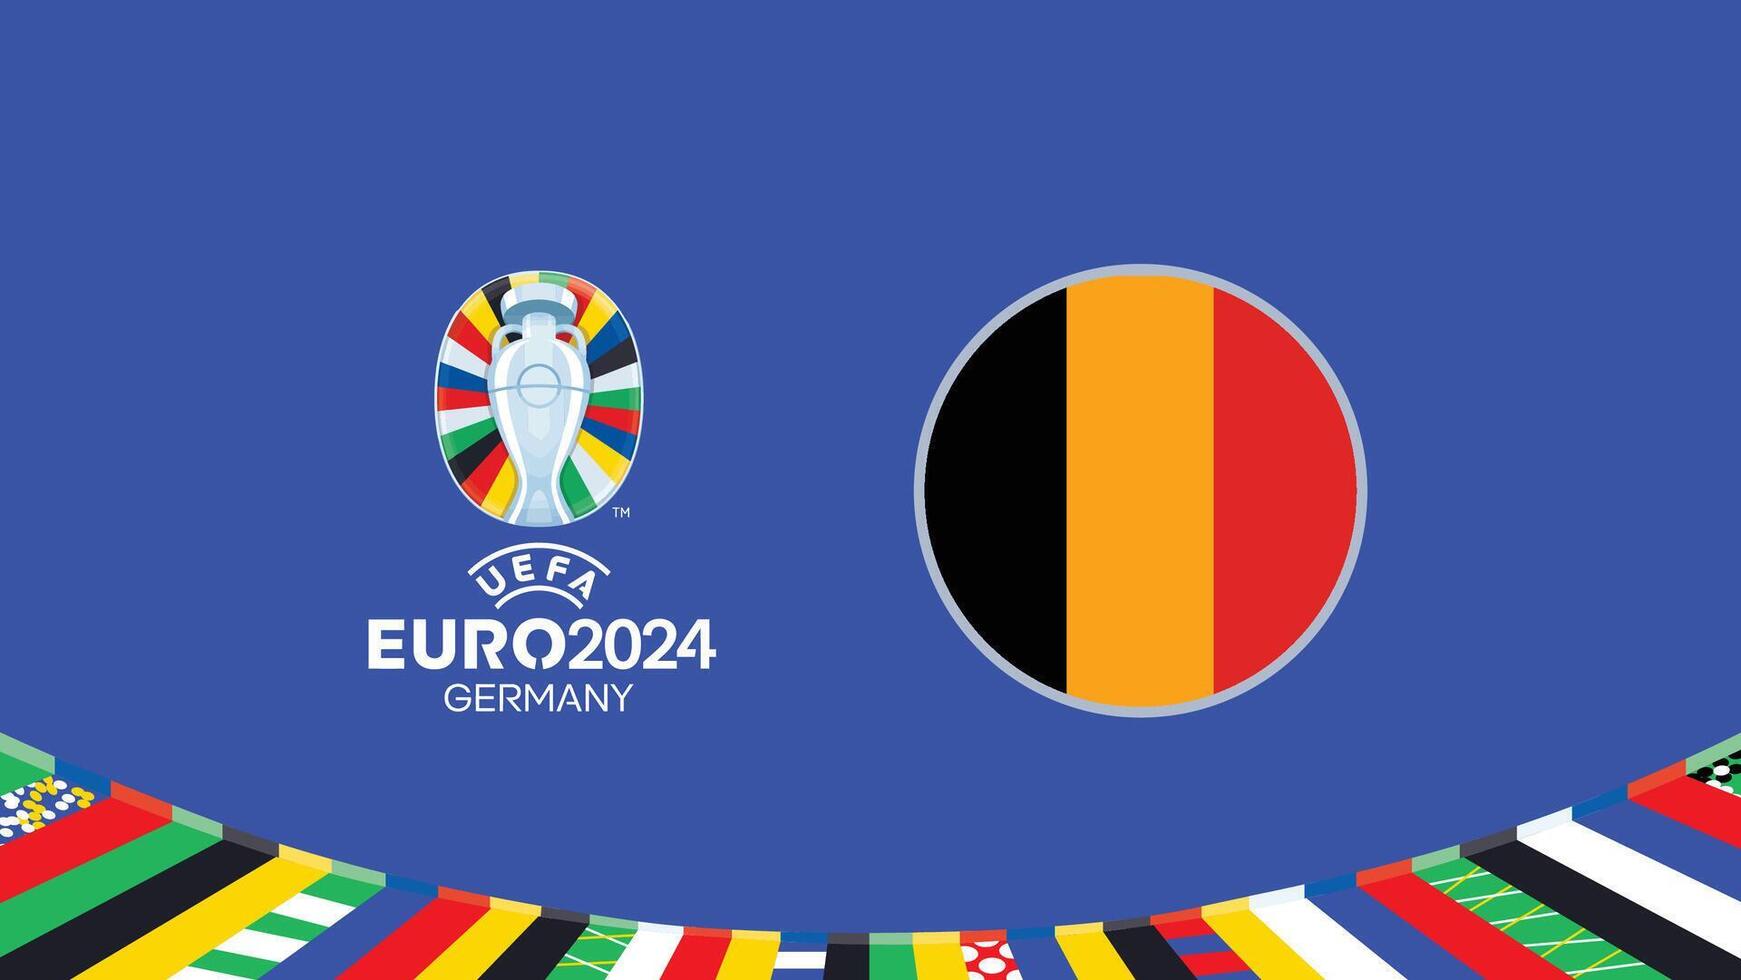 Euro 2024 Germany Flag Teams Design With Official Symbol Logo Abstract Countries European Football Illustration vector